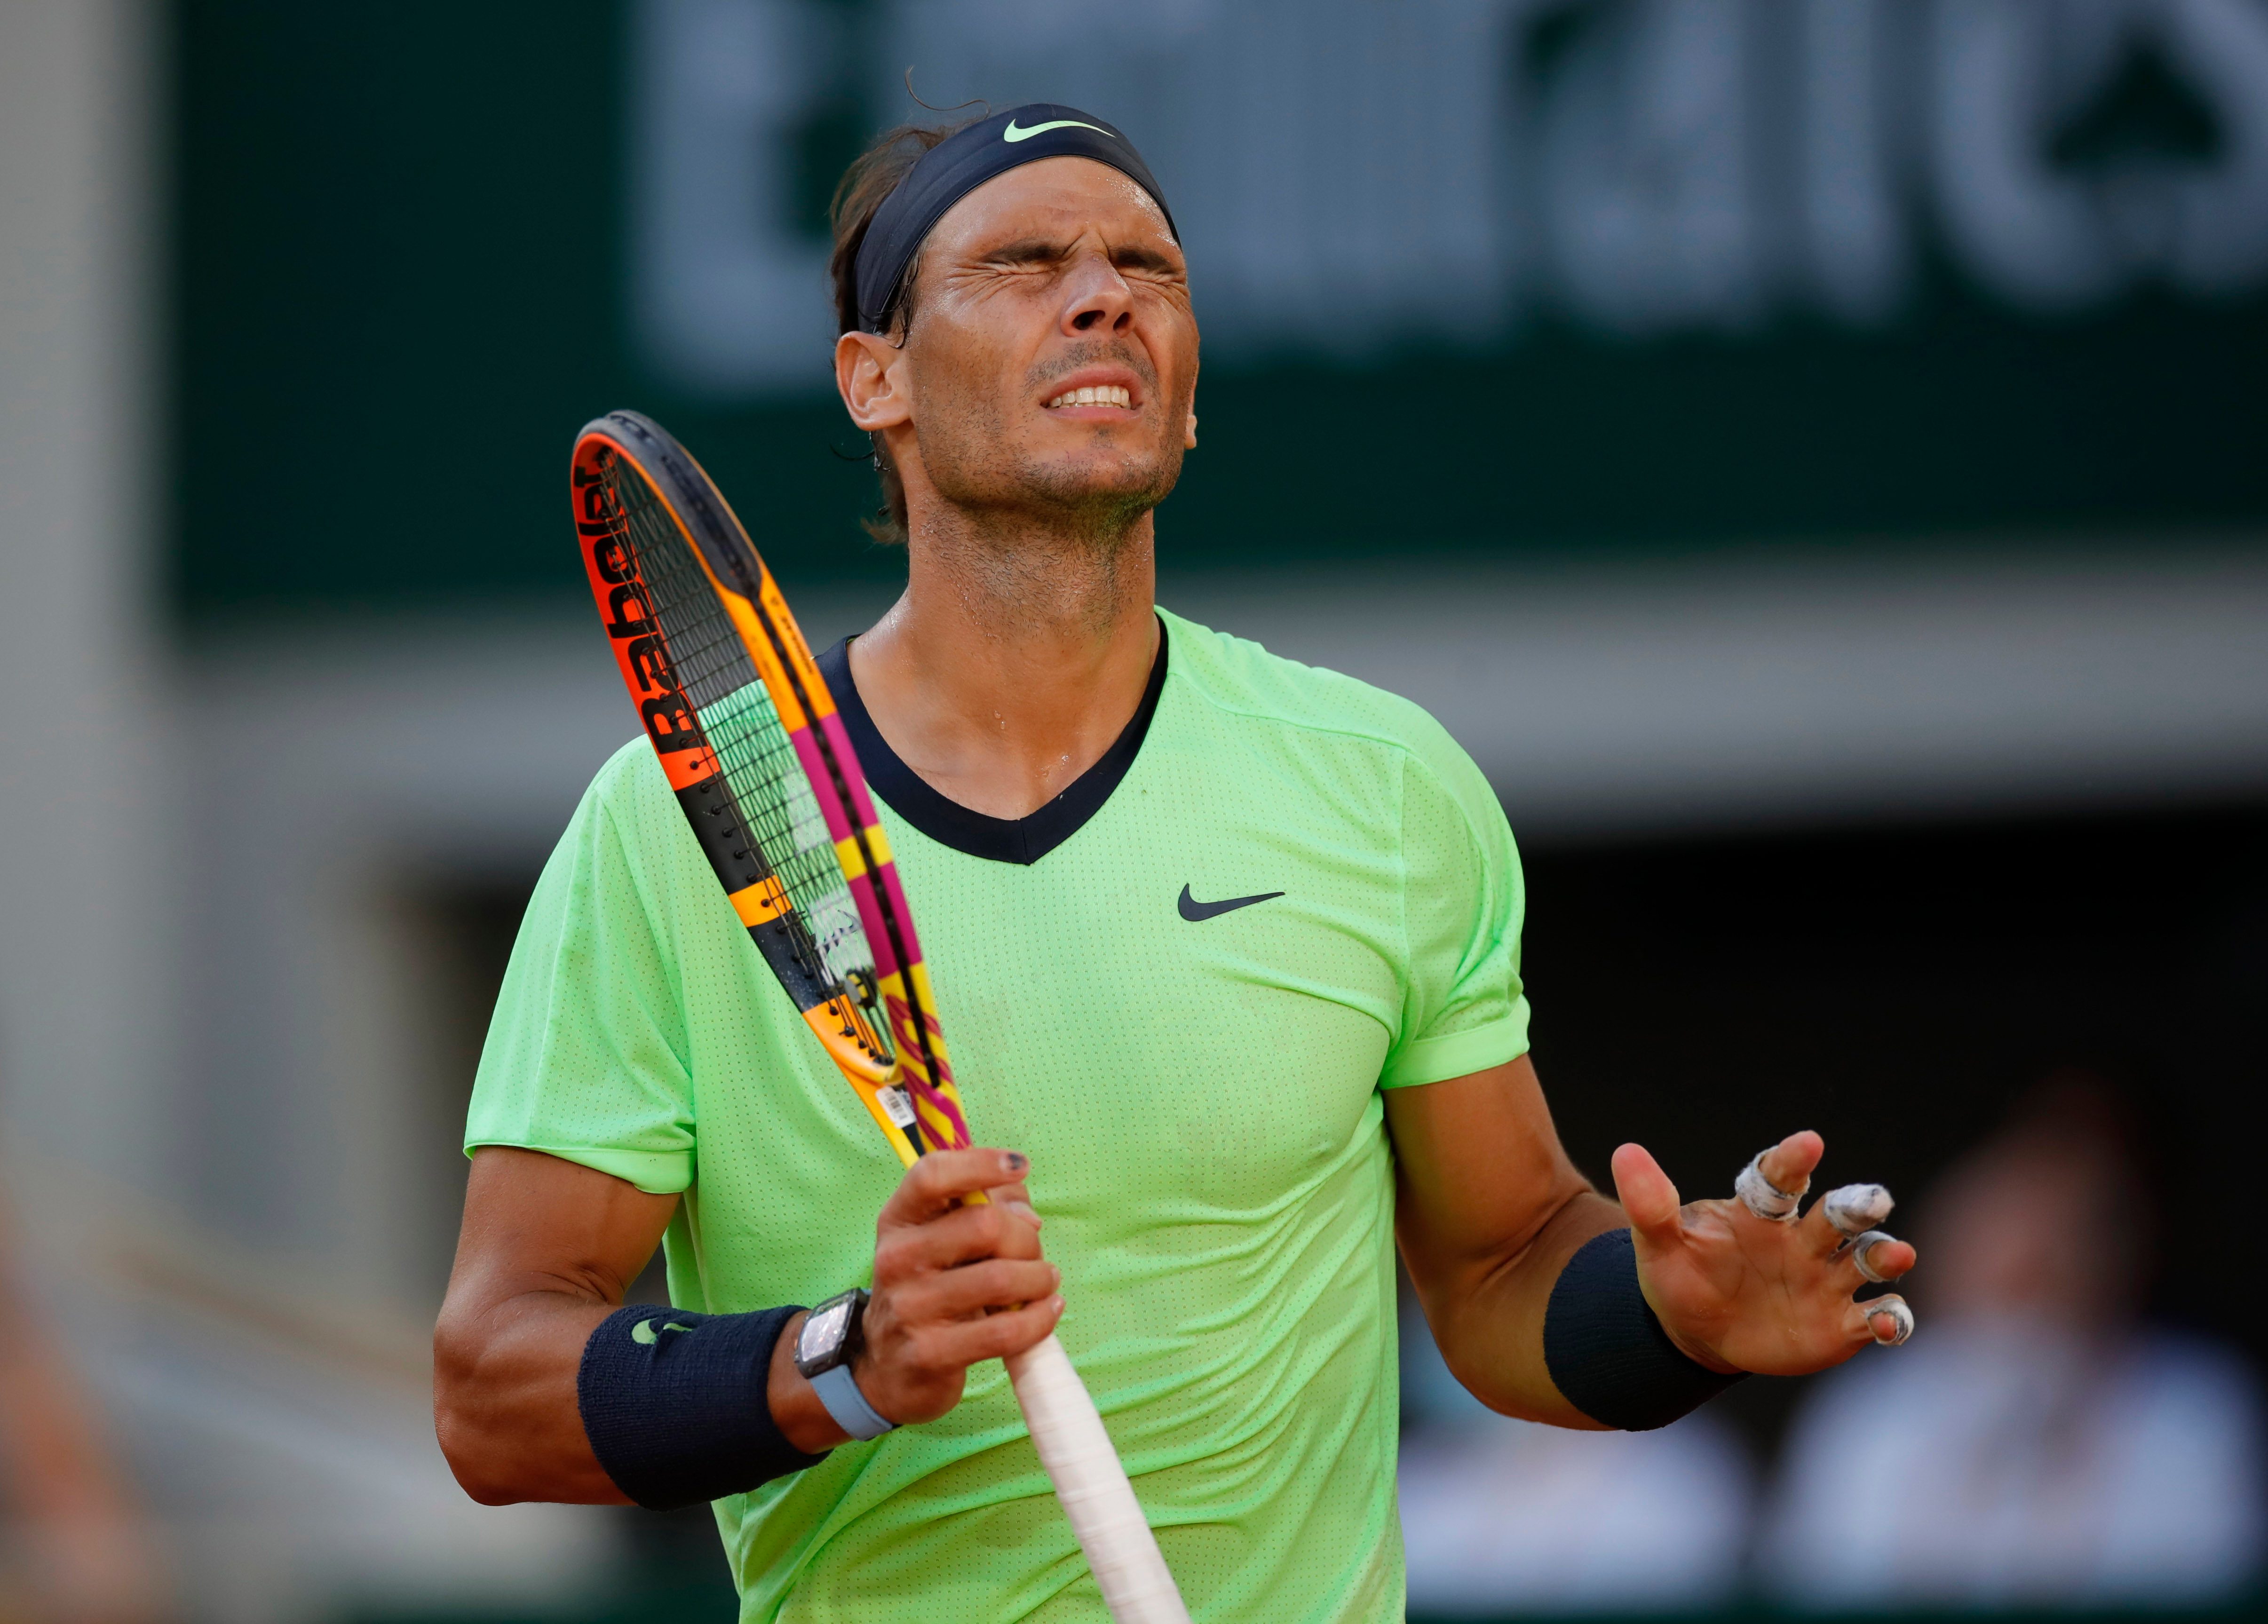 Nadal concedes best player won: ‘Not my day’